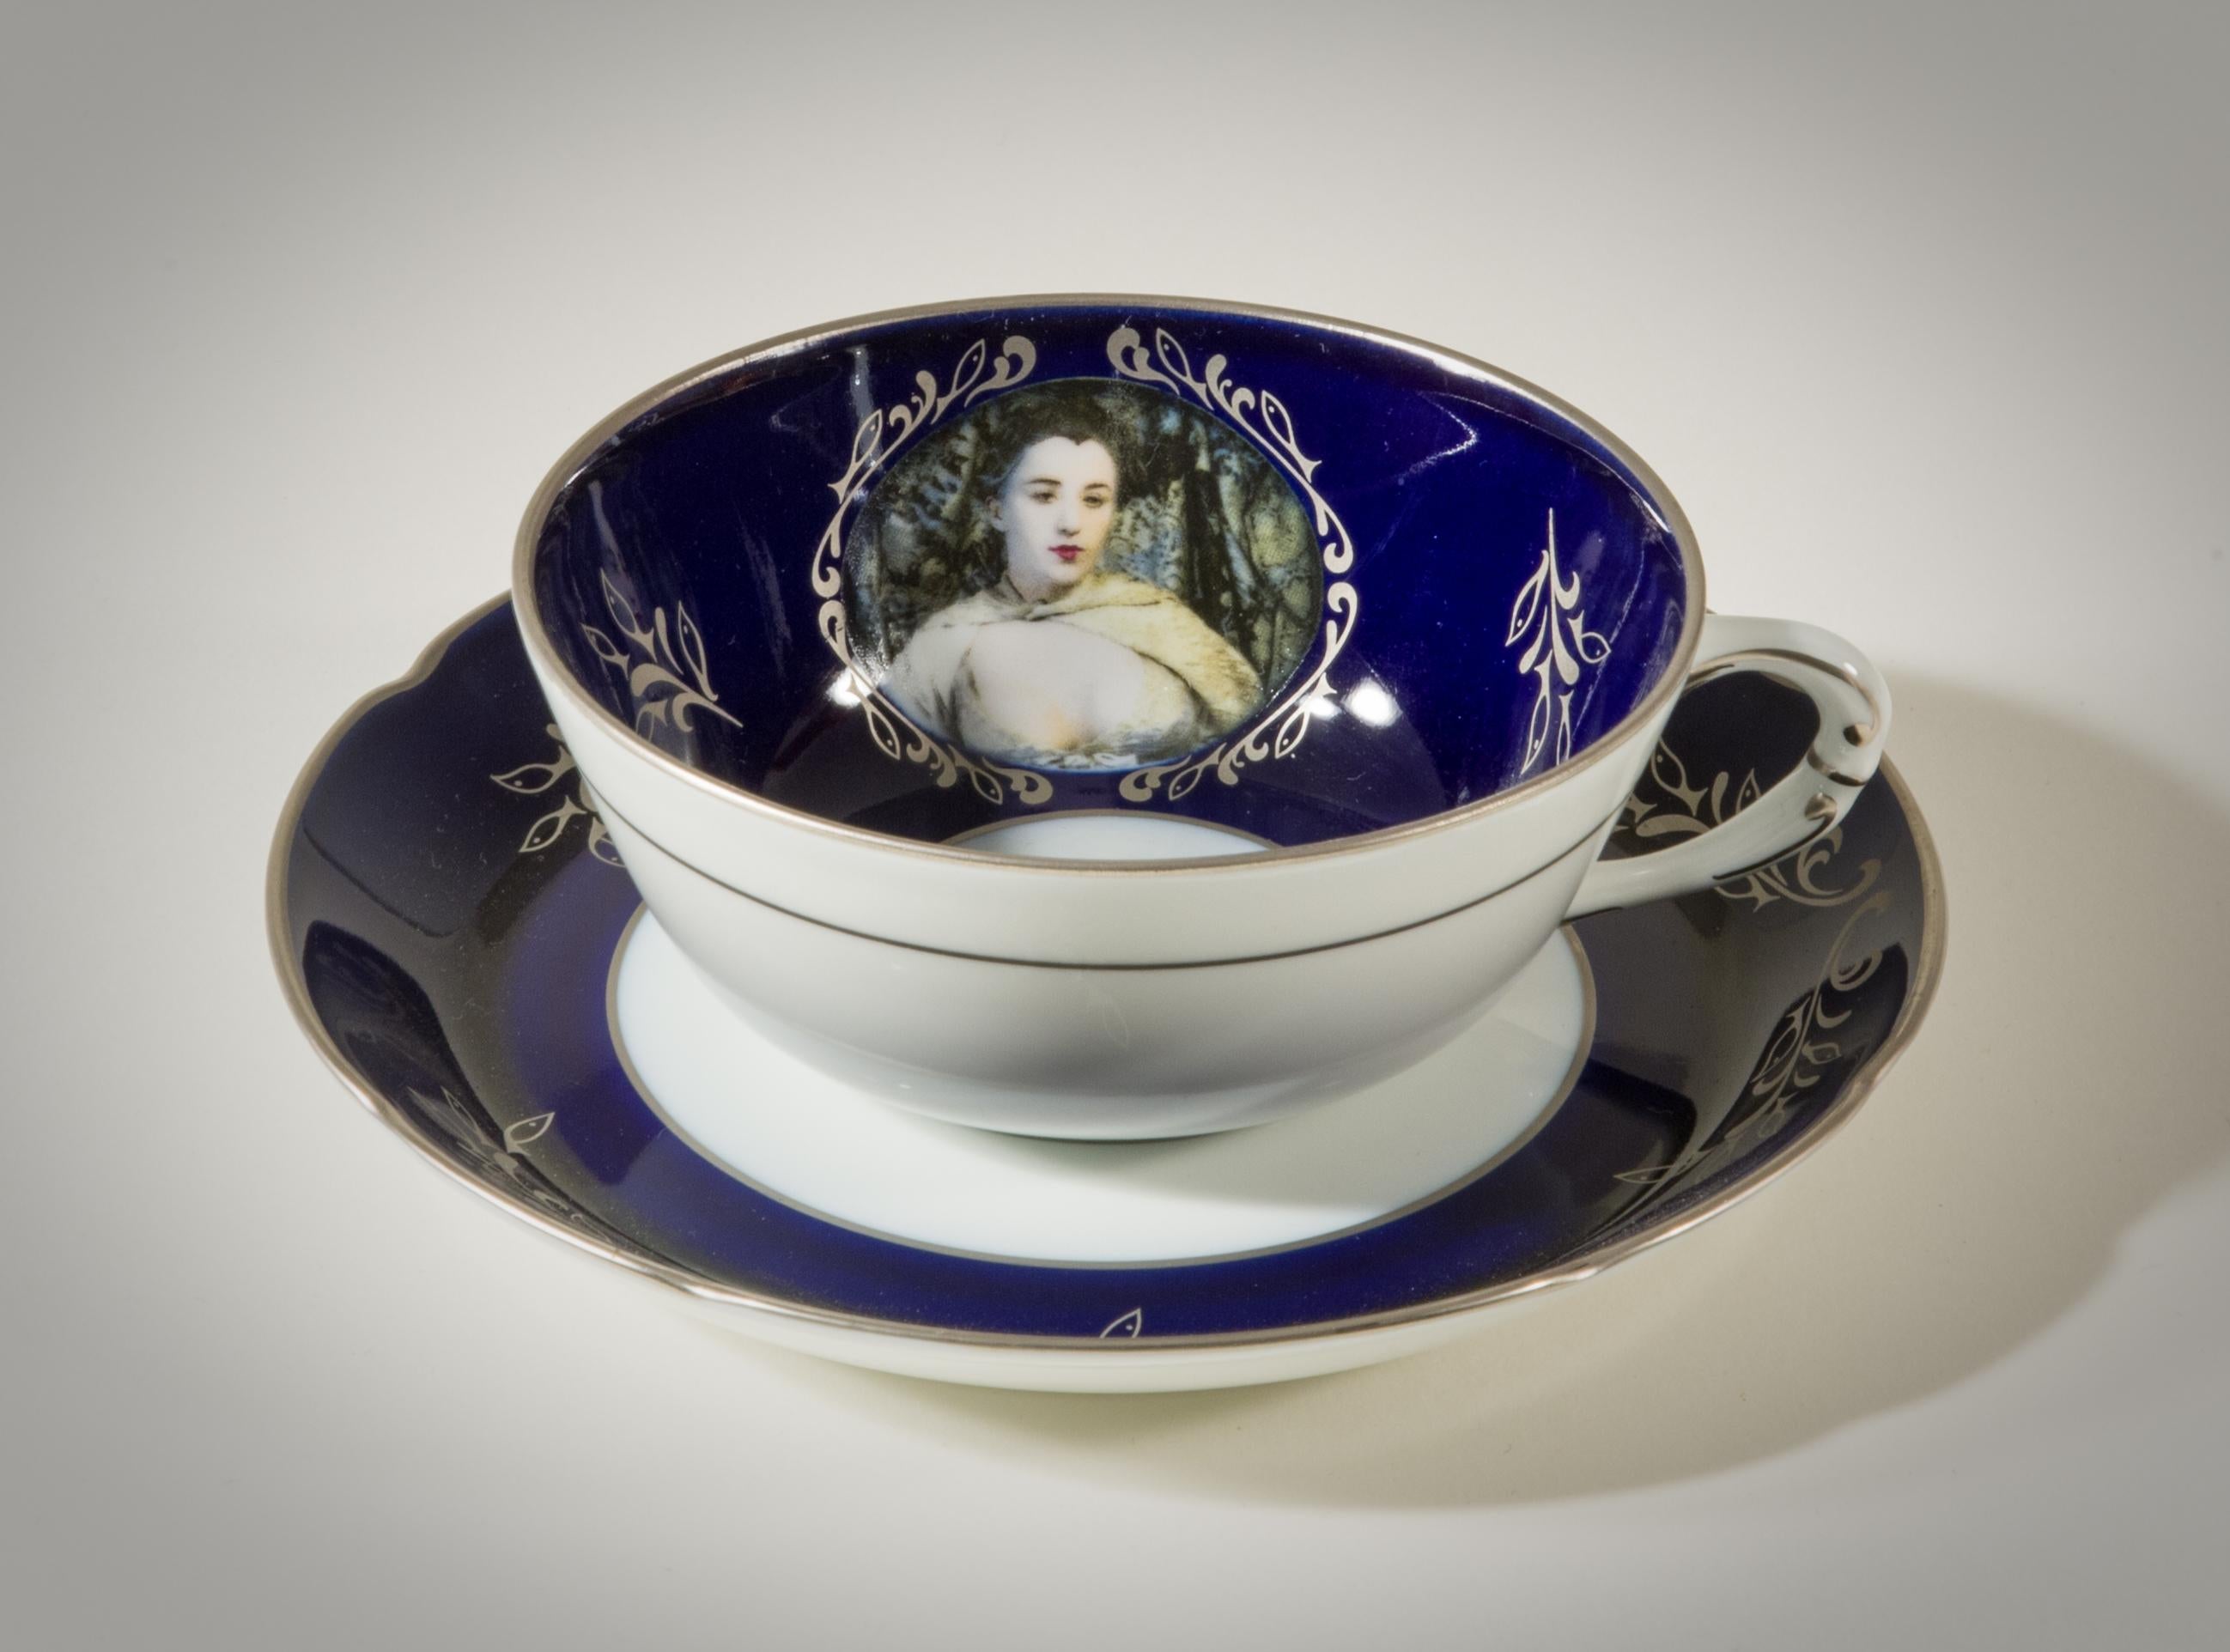 Madame de Pompadour (née Poisson) tea set, 1990
21-piece porcelain Tea Service: 
1 teapot
1 sugar bowl
1 creamer
6 cups
6 saucers
6 dessert plates
dimensions vary
Edition of 75 in blue

Included are the original fitted boxes. 

Cindy Sherman created